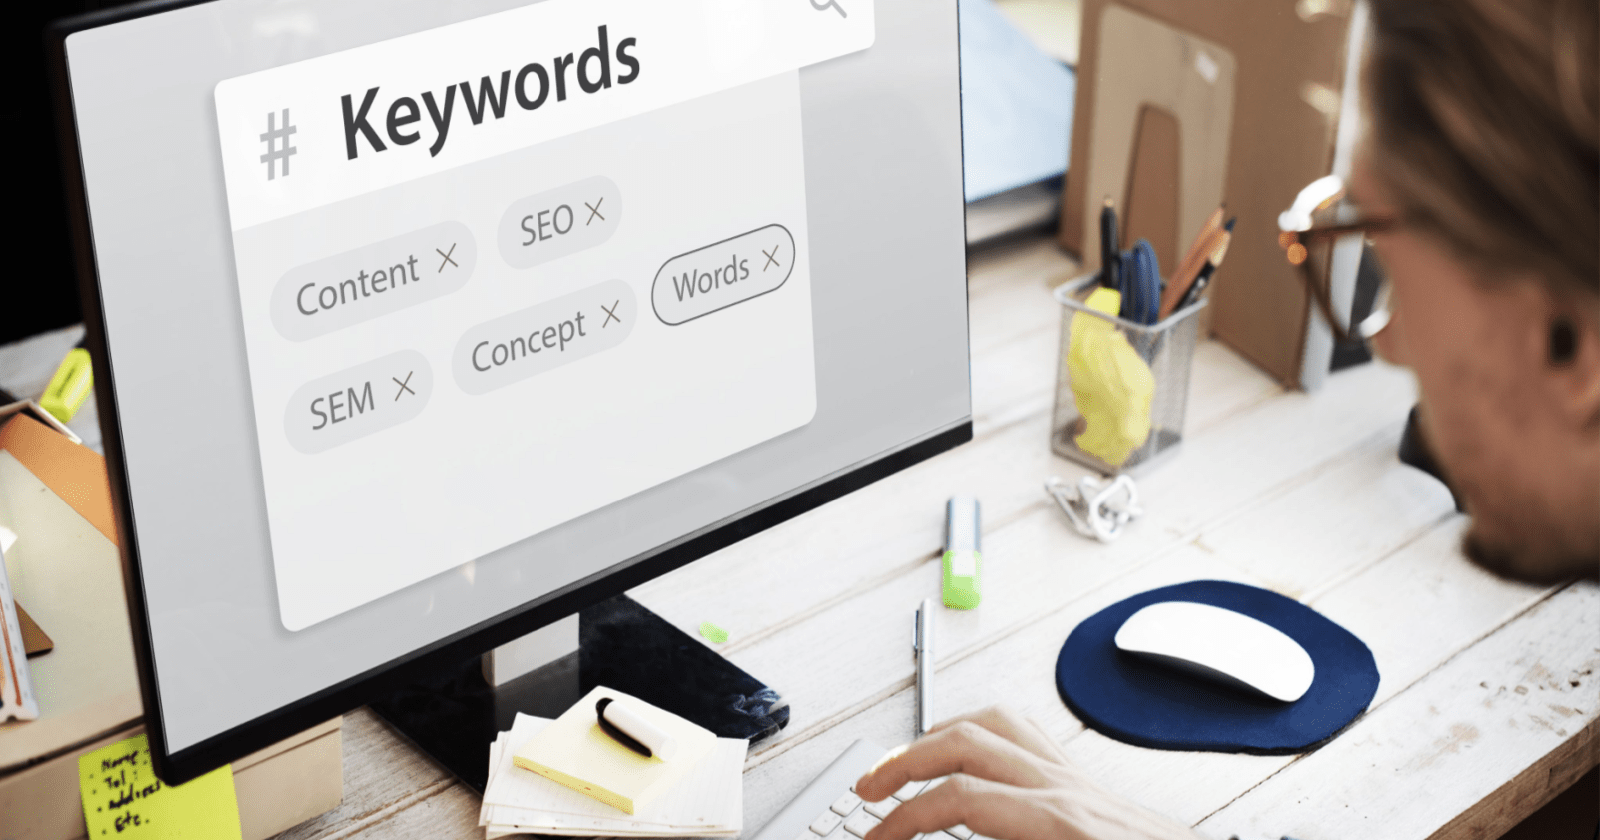 7 Enterprise SEO Tools For Keyword Research Compared